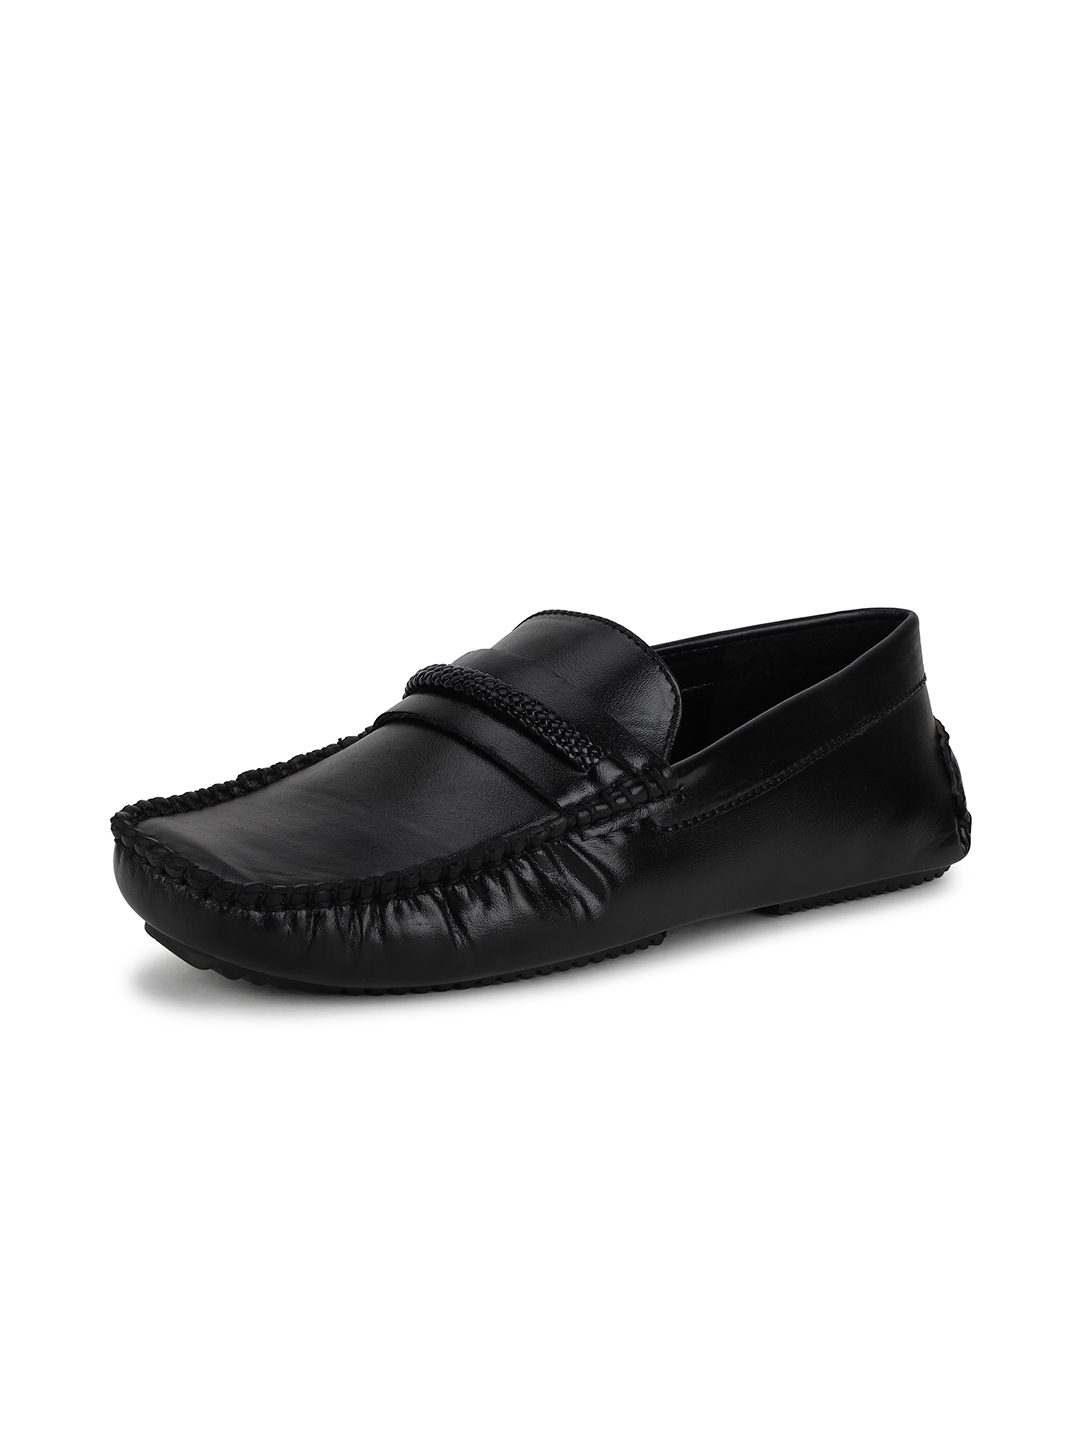 Buy Peter England Men Black Loafers - Casual Shoes for Men 10548100 ...